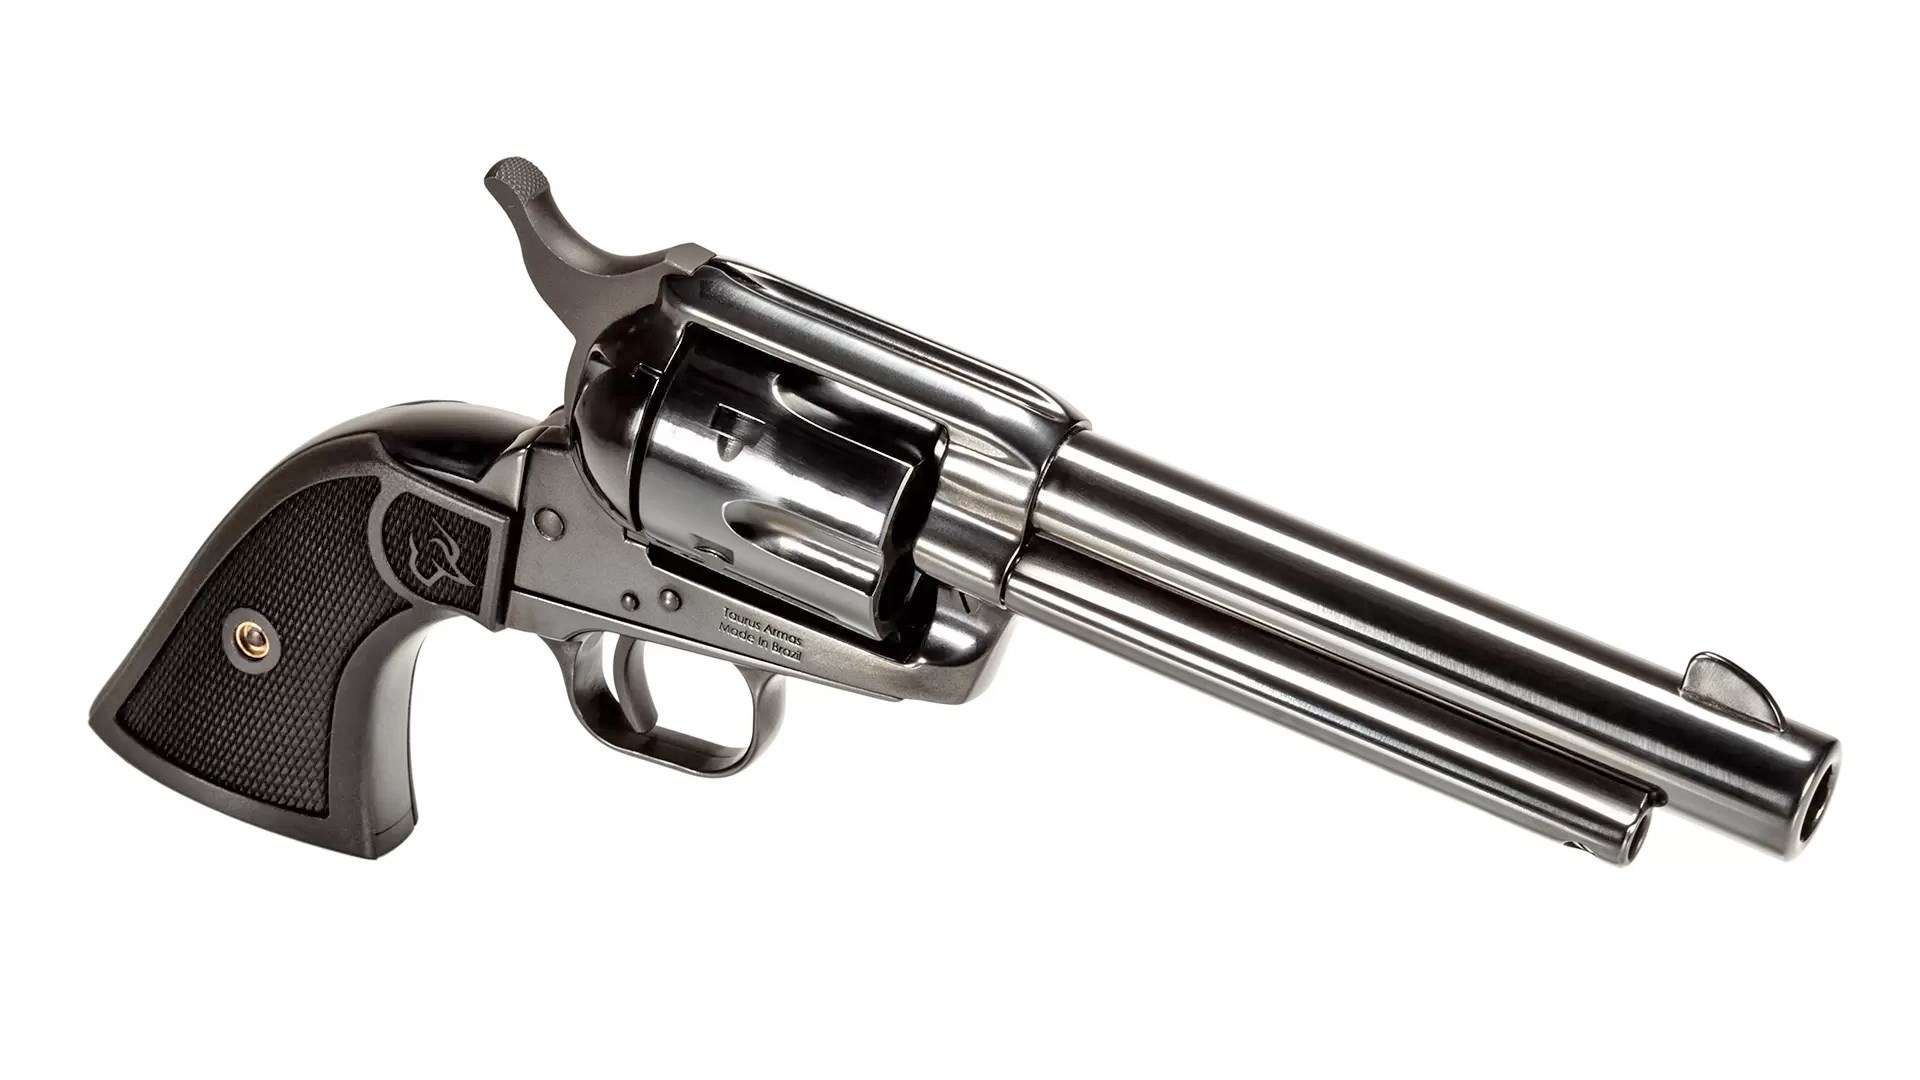 Right side of the all-black Taurus Deputy single-action revolver.